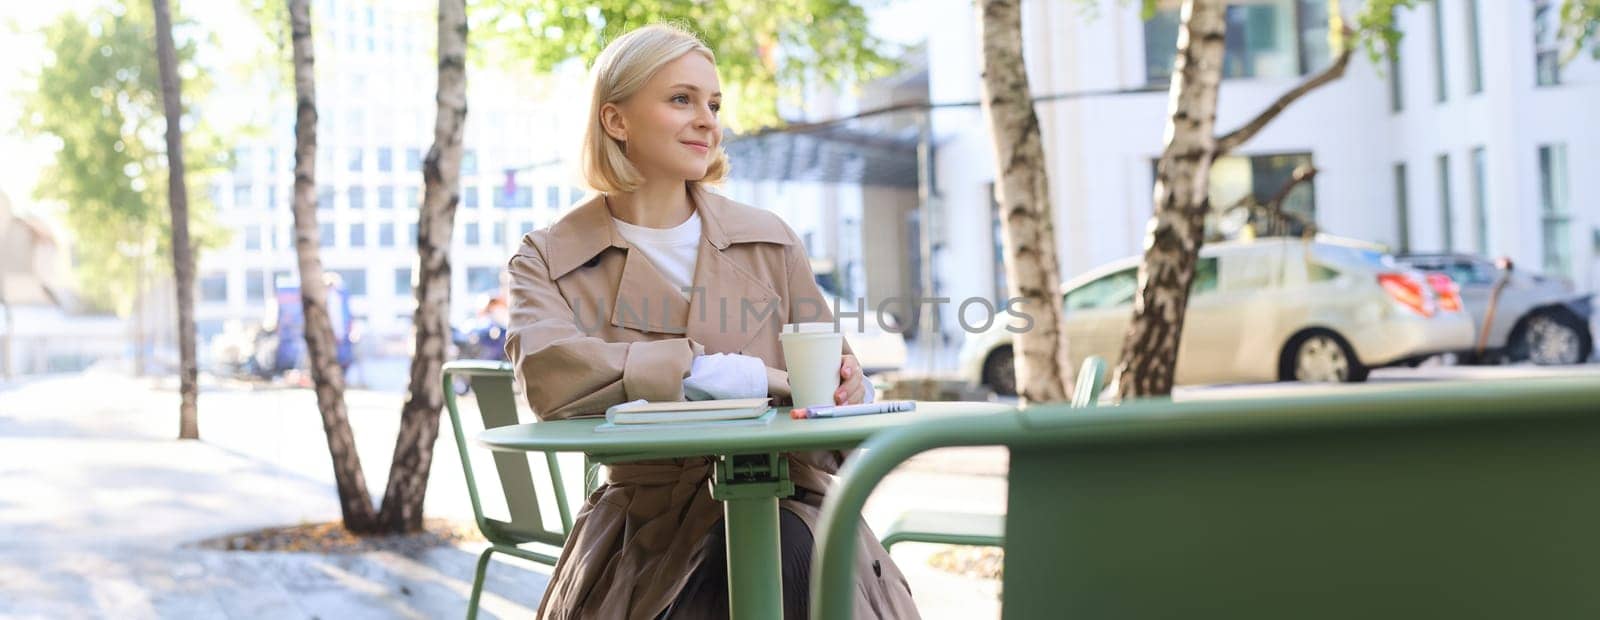 Urban lifestyle concept. Young beautiful woman sitting in outdoor cafe, contemplating city life, drinking coffee and smiling on street.